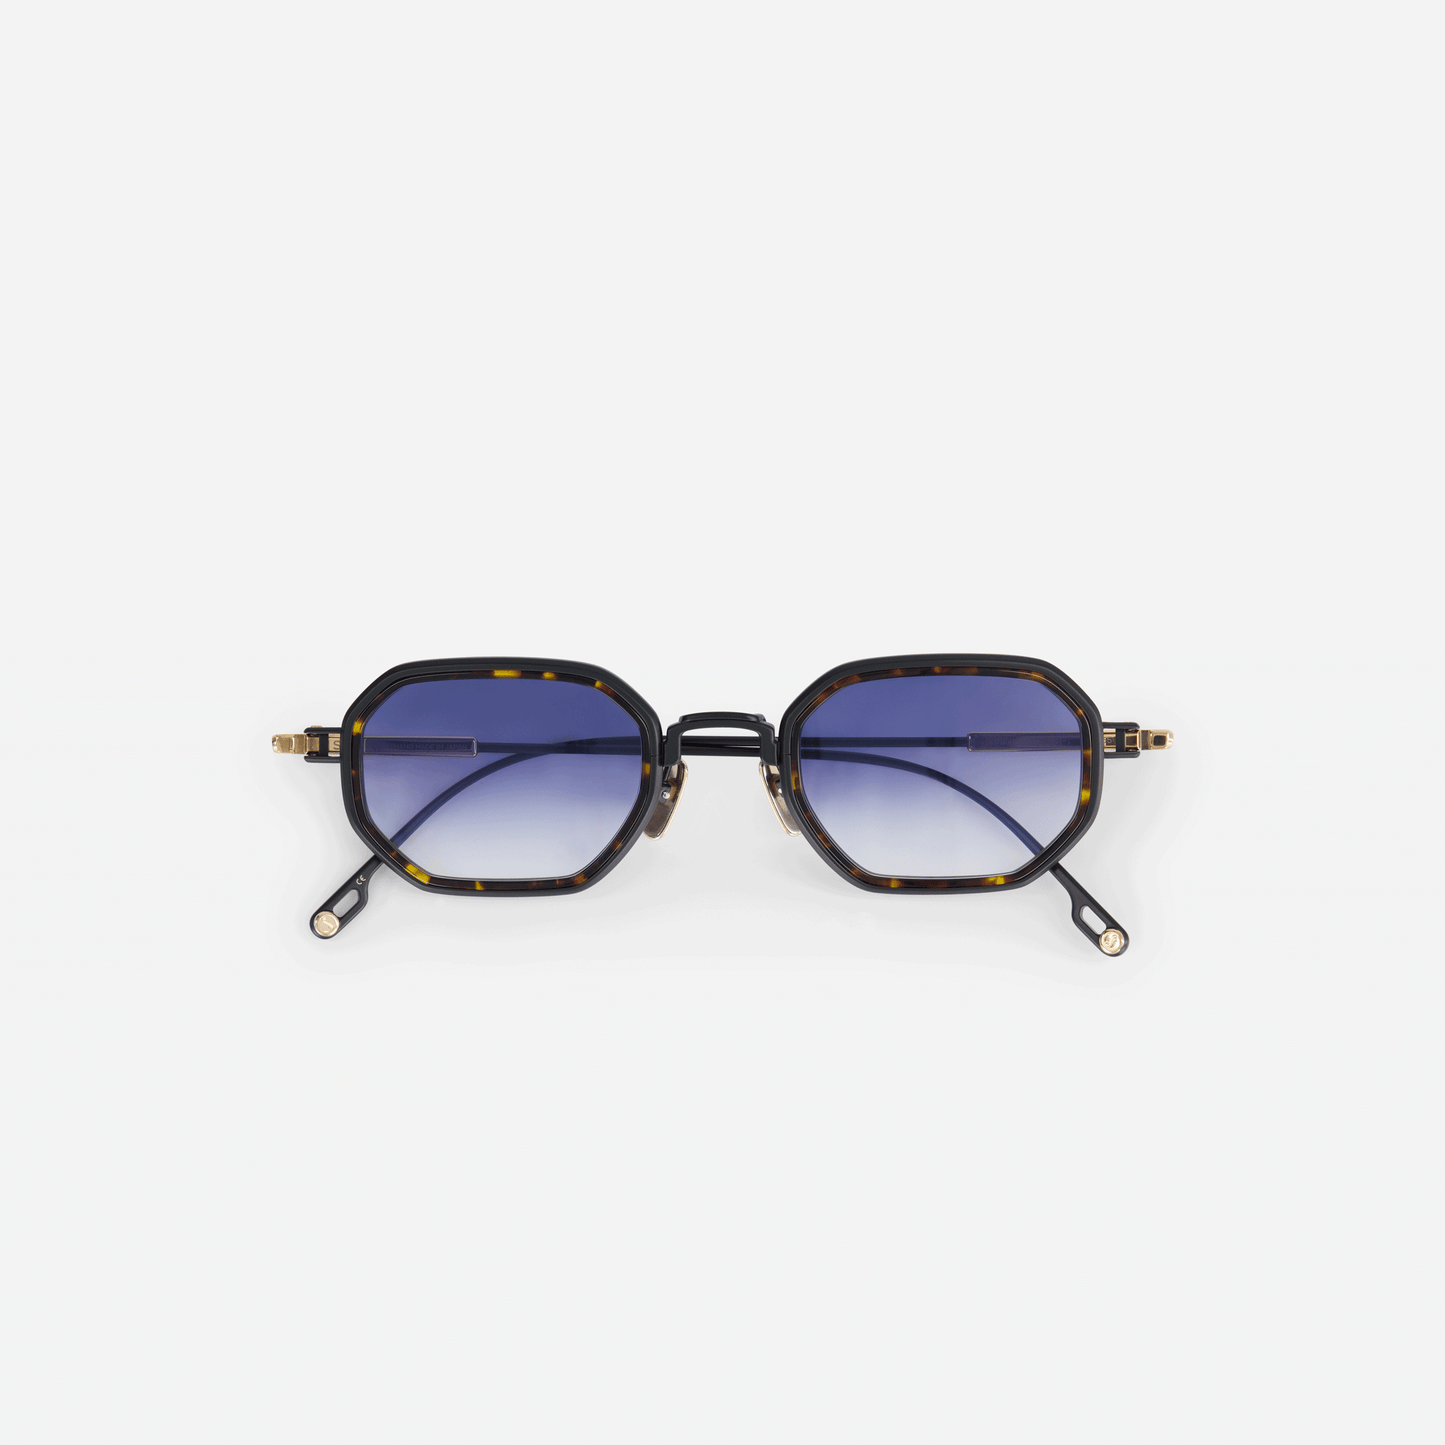 Timir-T S5506 glasses, meticulously crafted from pure black gold and lunar gold titanium frames, featuring a tortoise Takiron insert and dark blue gradient lenses.